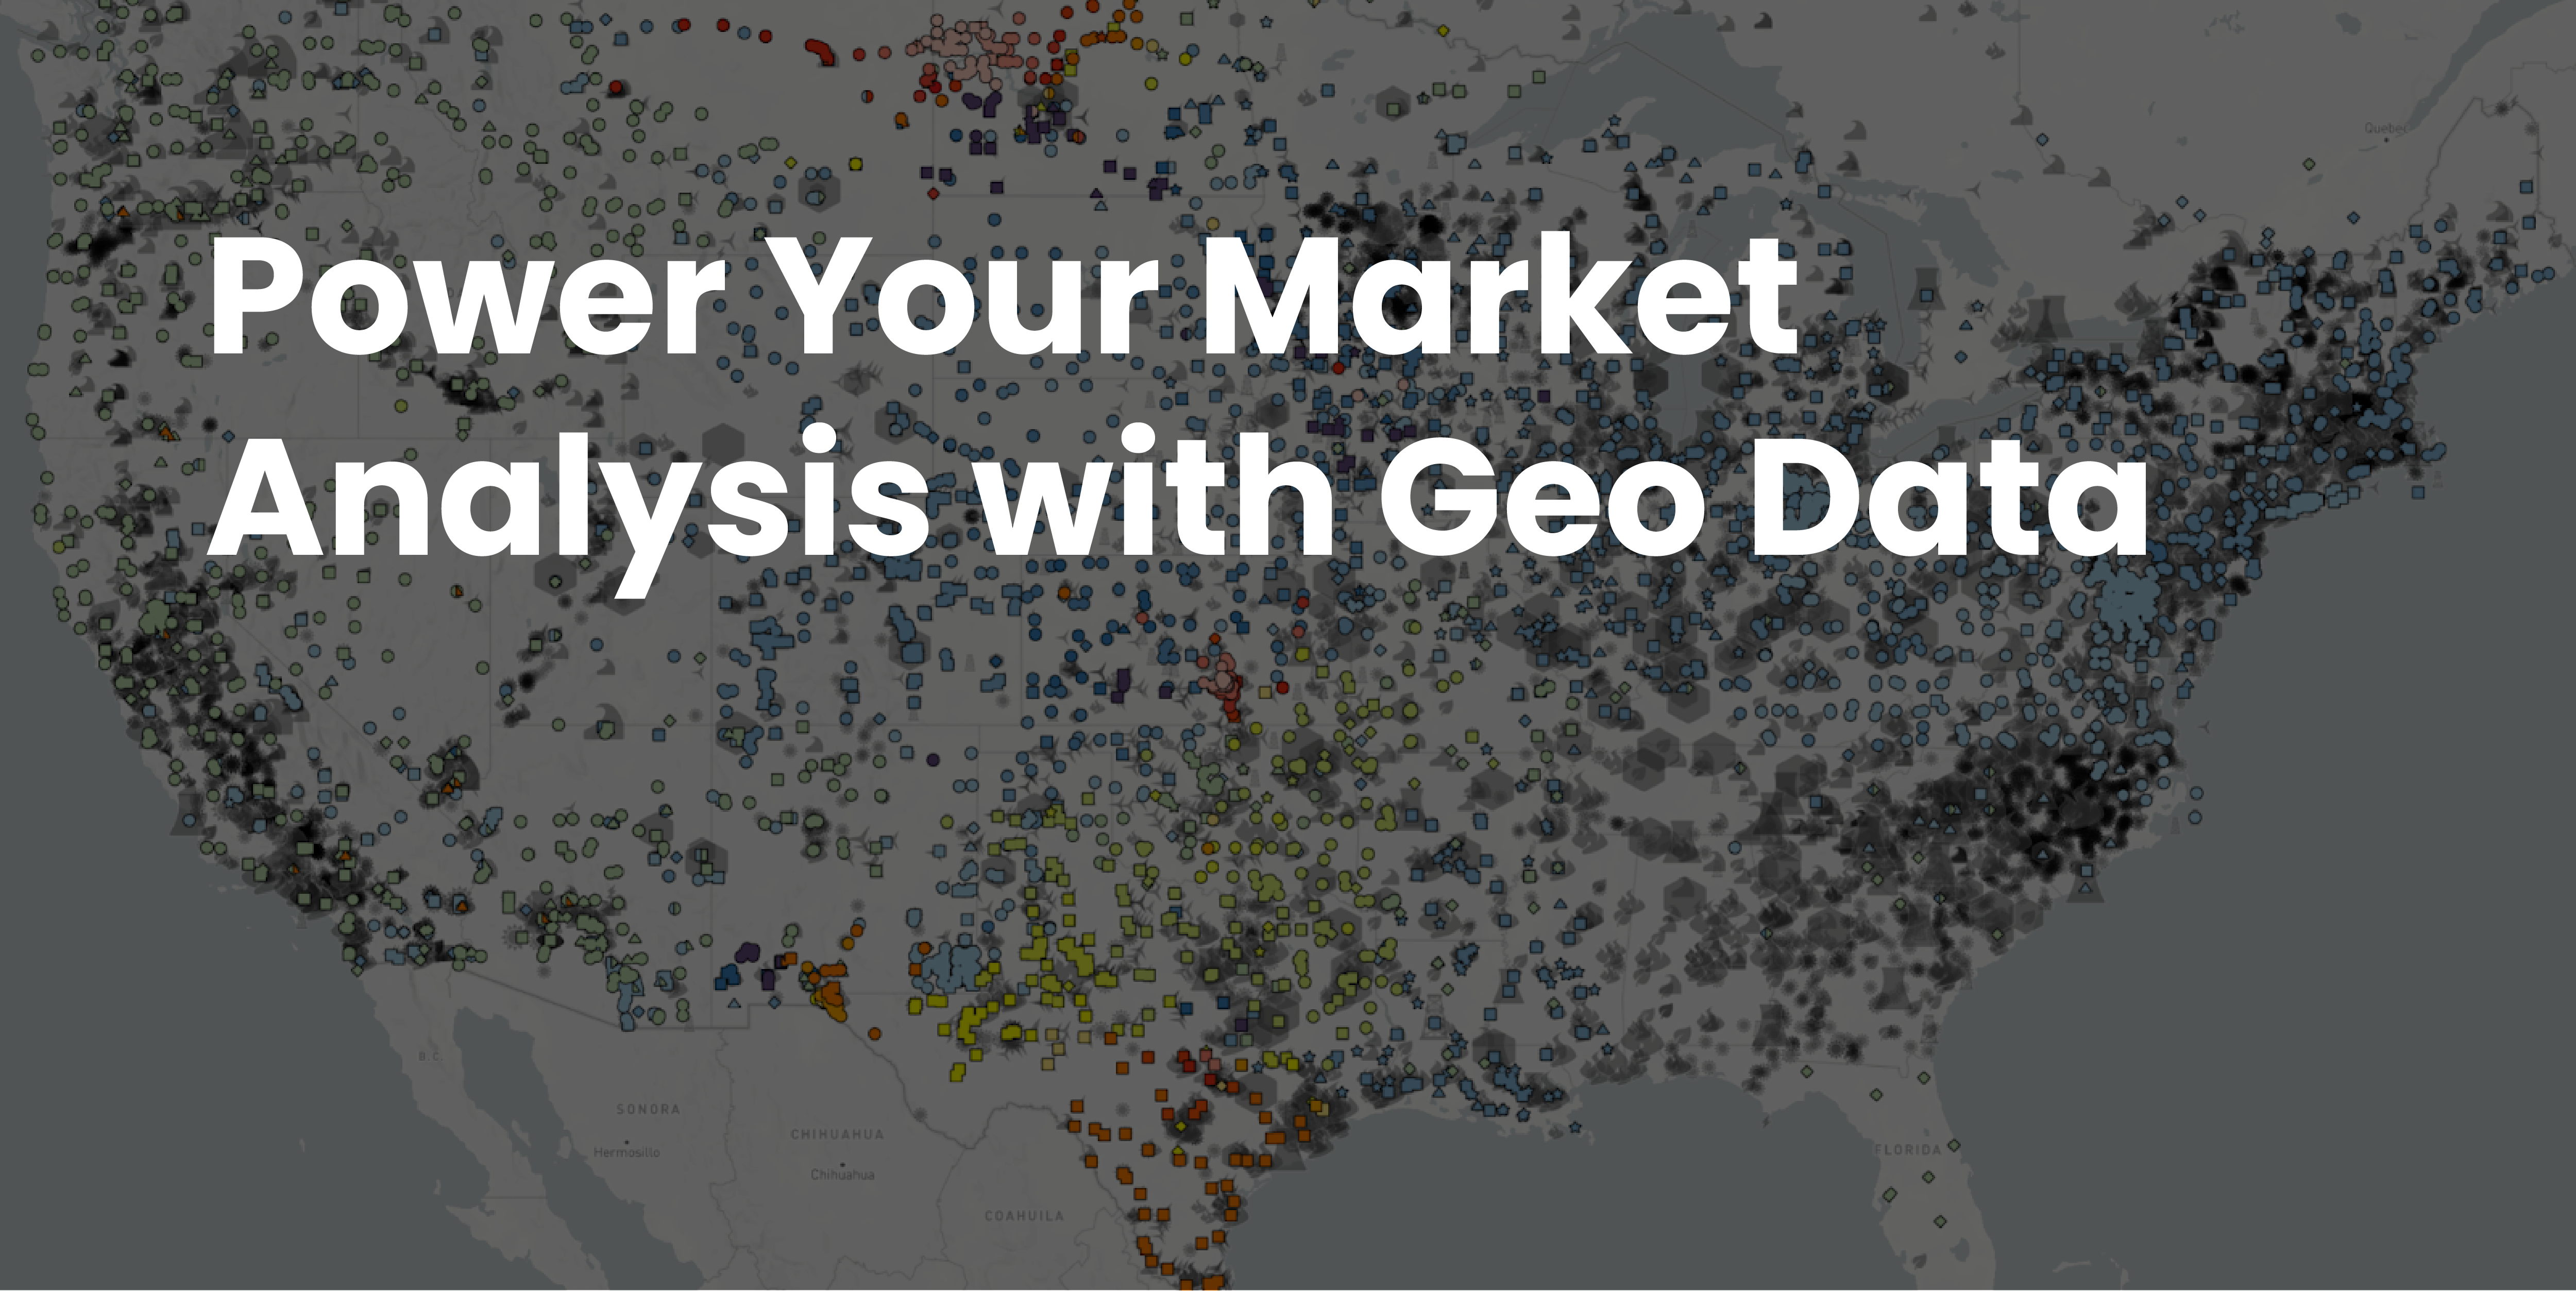 Power your market analysis with Geo Data